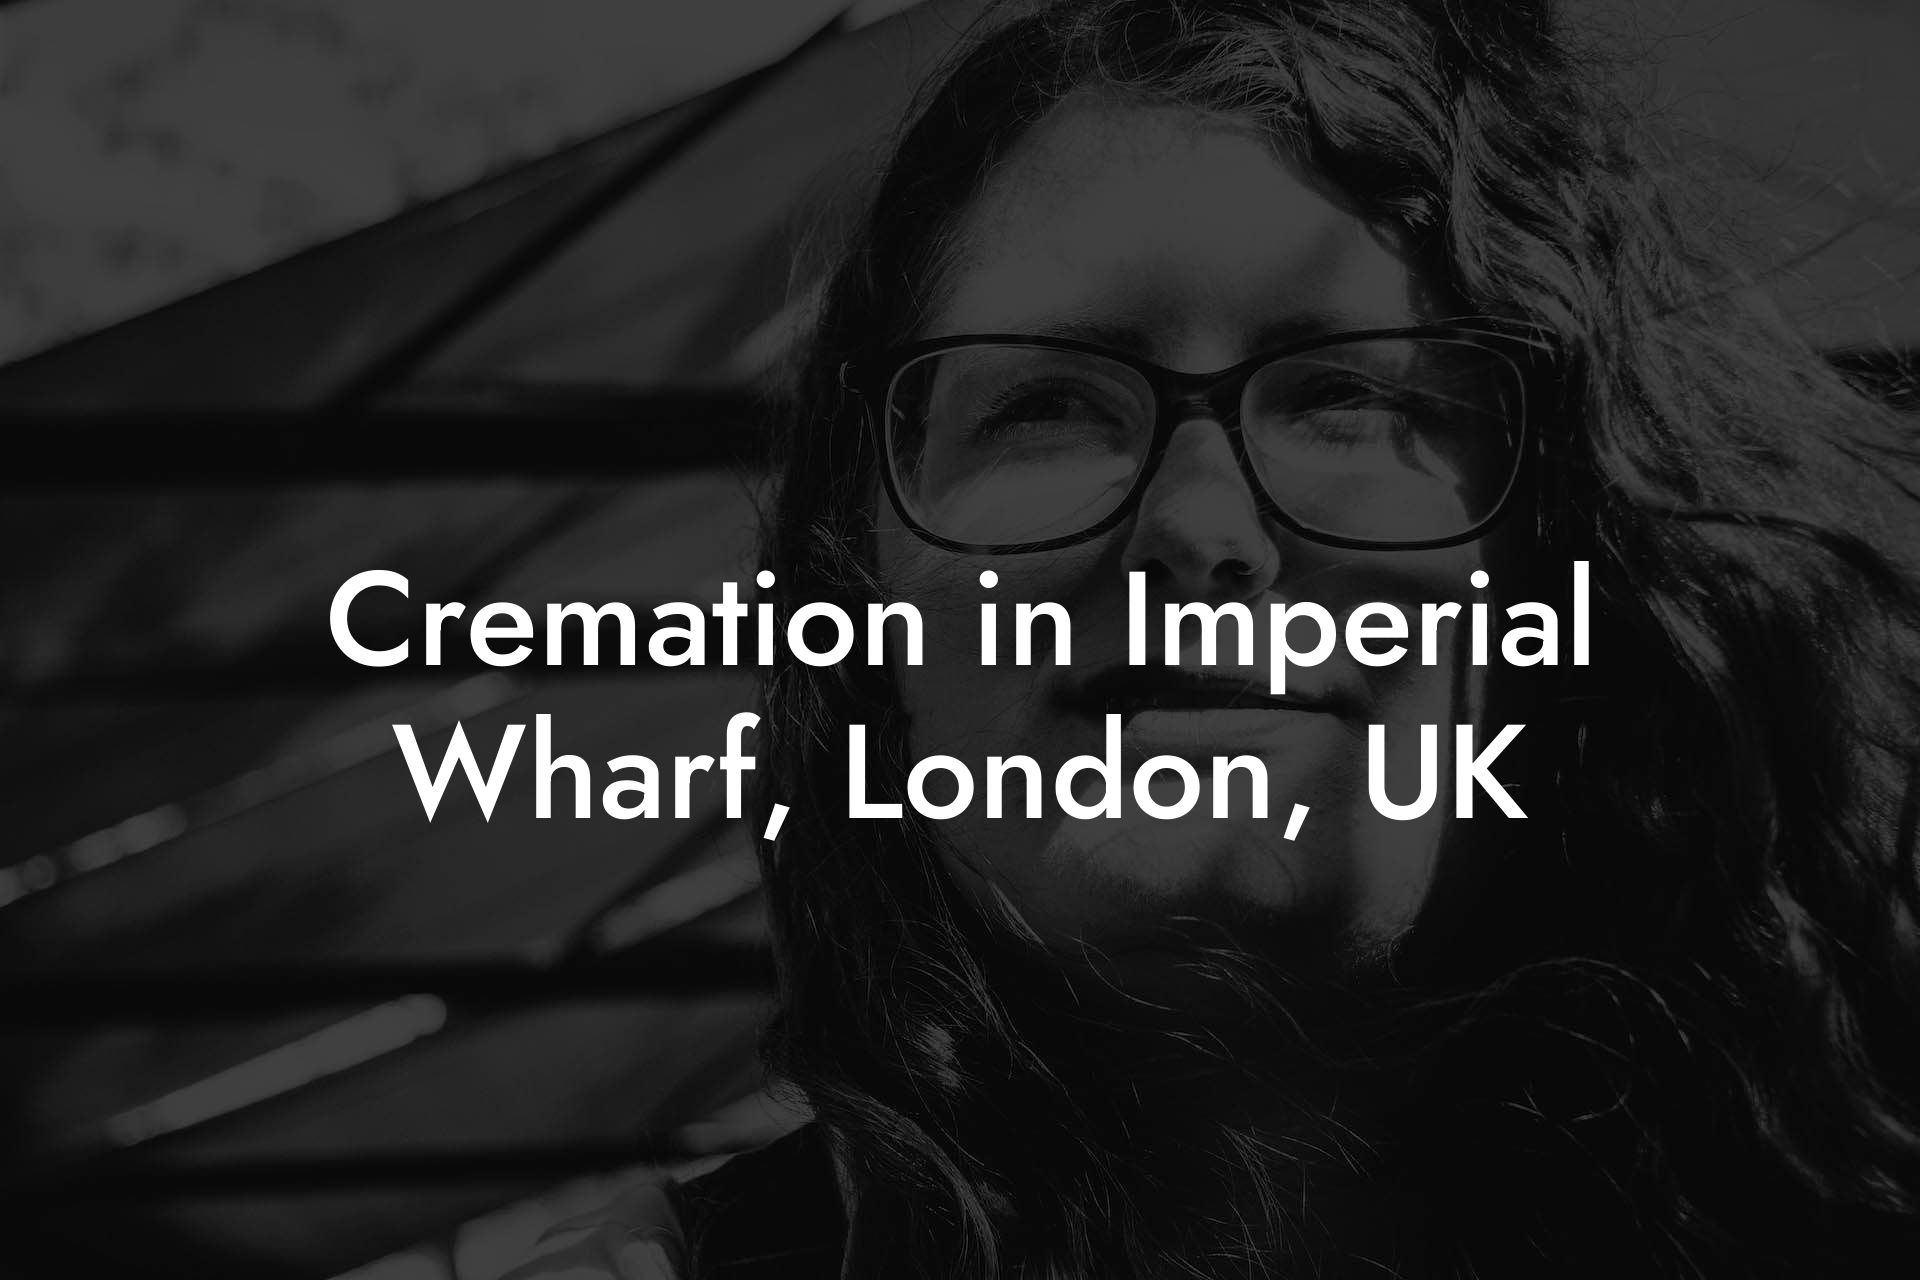 Cremation in Imperial Wharf, London, UK